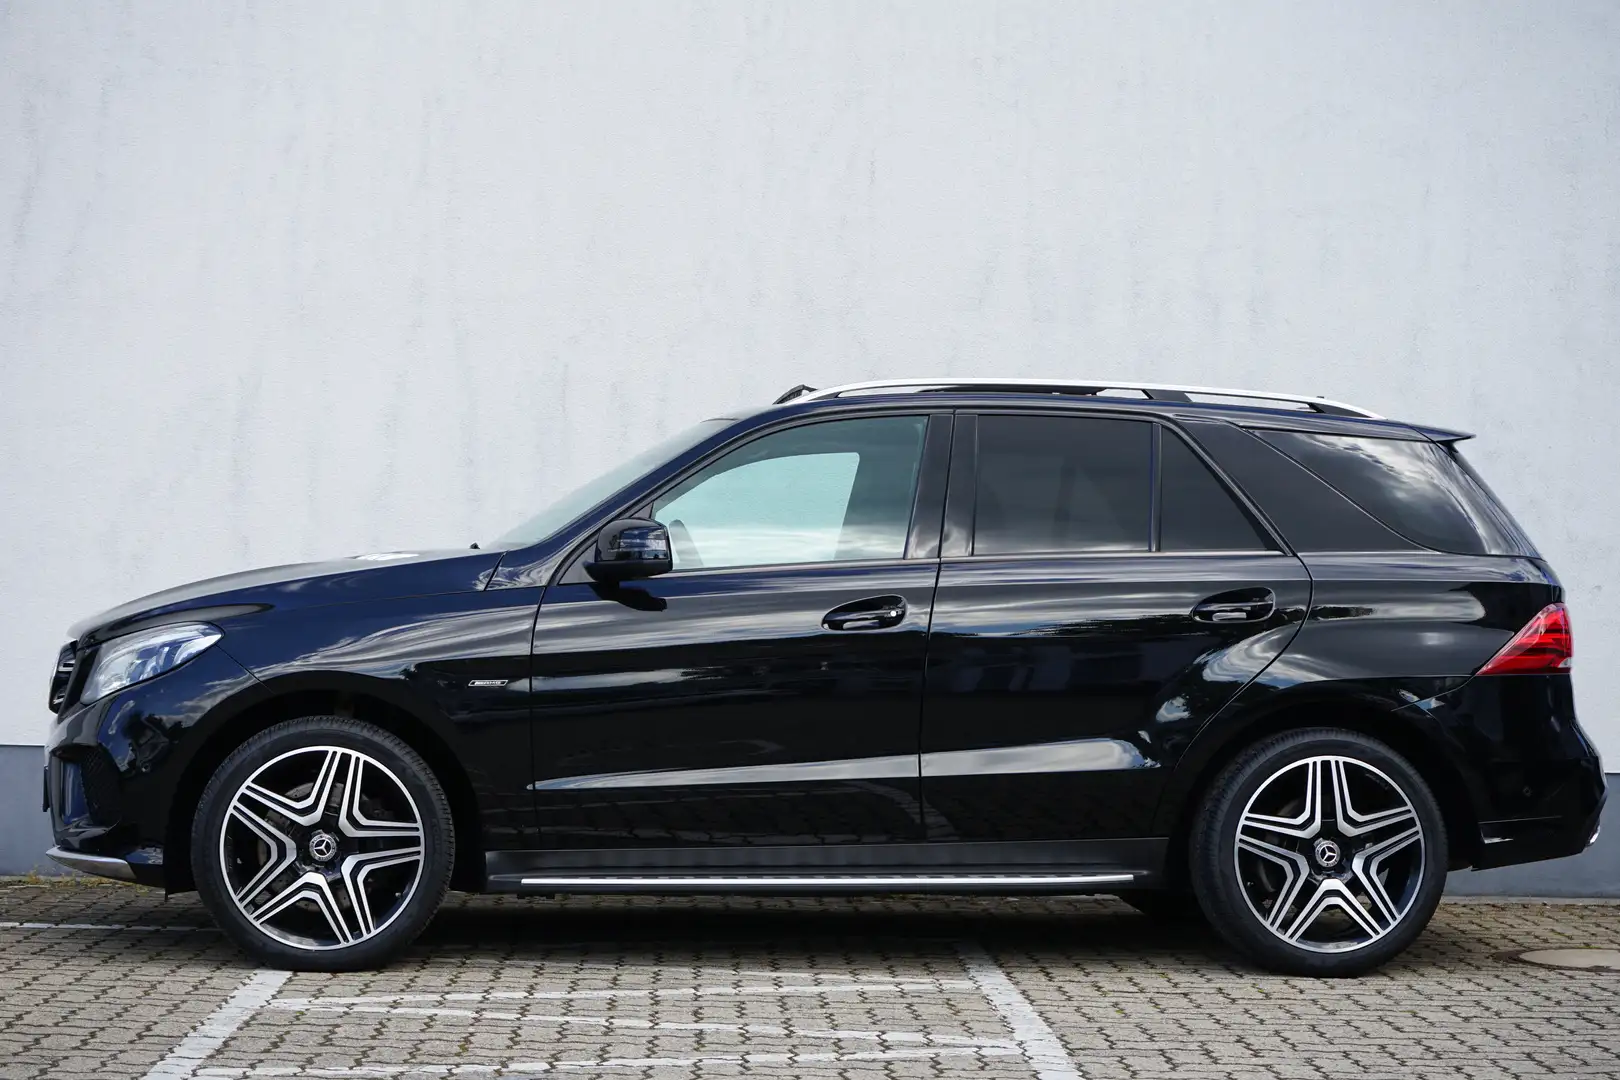 Mercedes-Benz GLE 450 4MATIC*21 Zoll*Panorama*LED ILS*Standheizung*Voll Noir - 2